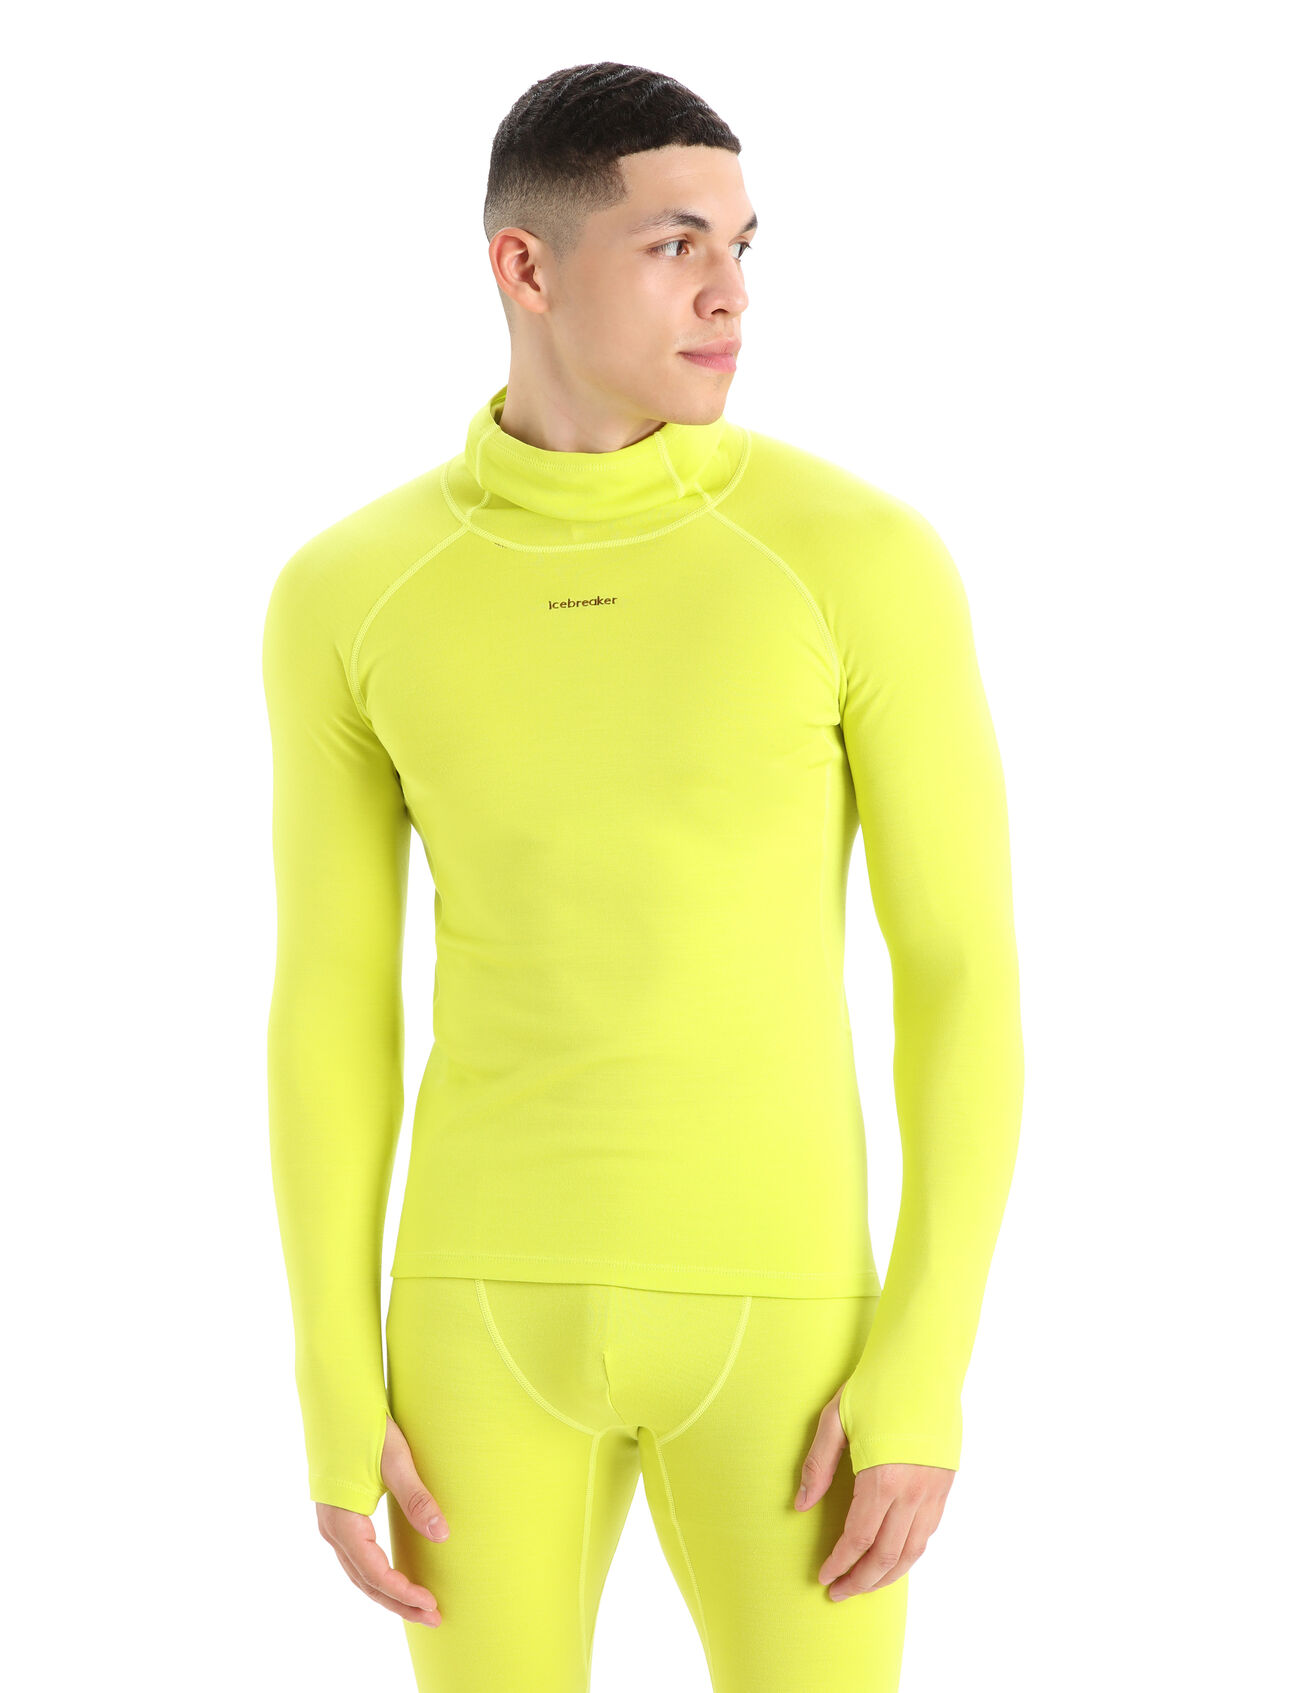 Mens MerinoFine™ Long Sleeve Roll Neck Thermal Top A premium, slim-fit base layer made with luxuriously soft 15.5 micron merino wool fibers and a high-neck design for added protection, the MerinoFine™ Long Sleeve Roll Neck is at the intersection of comfort and performance.